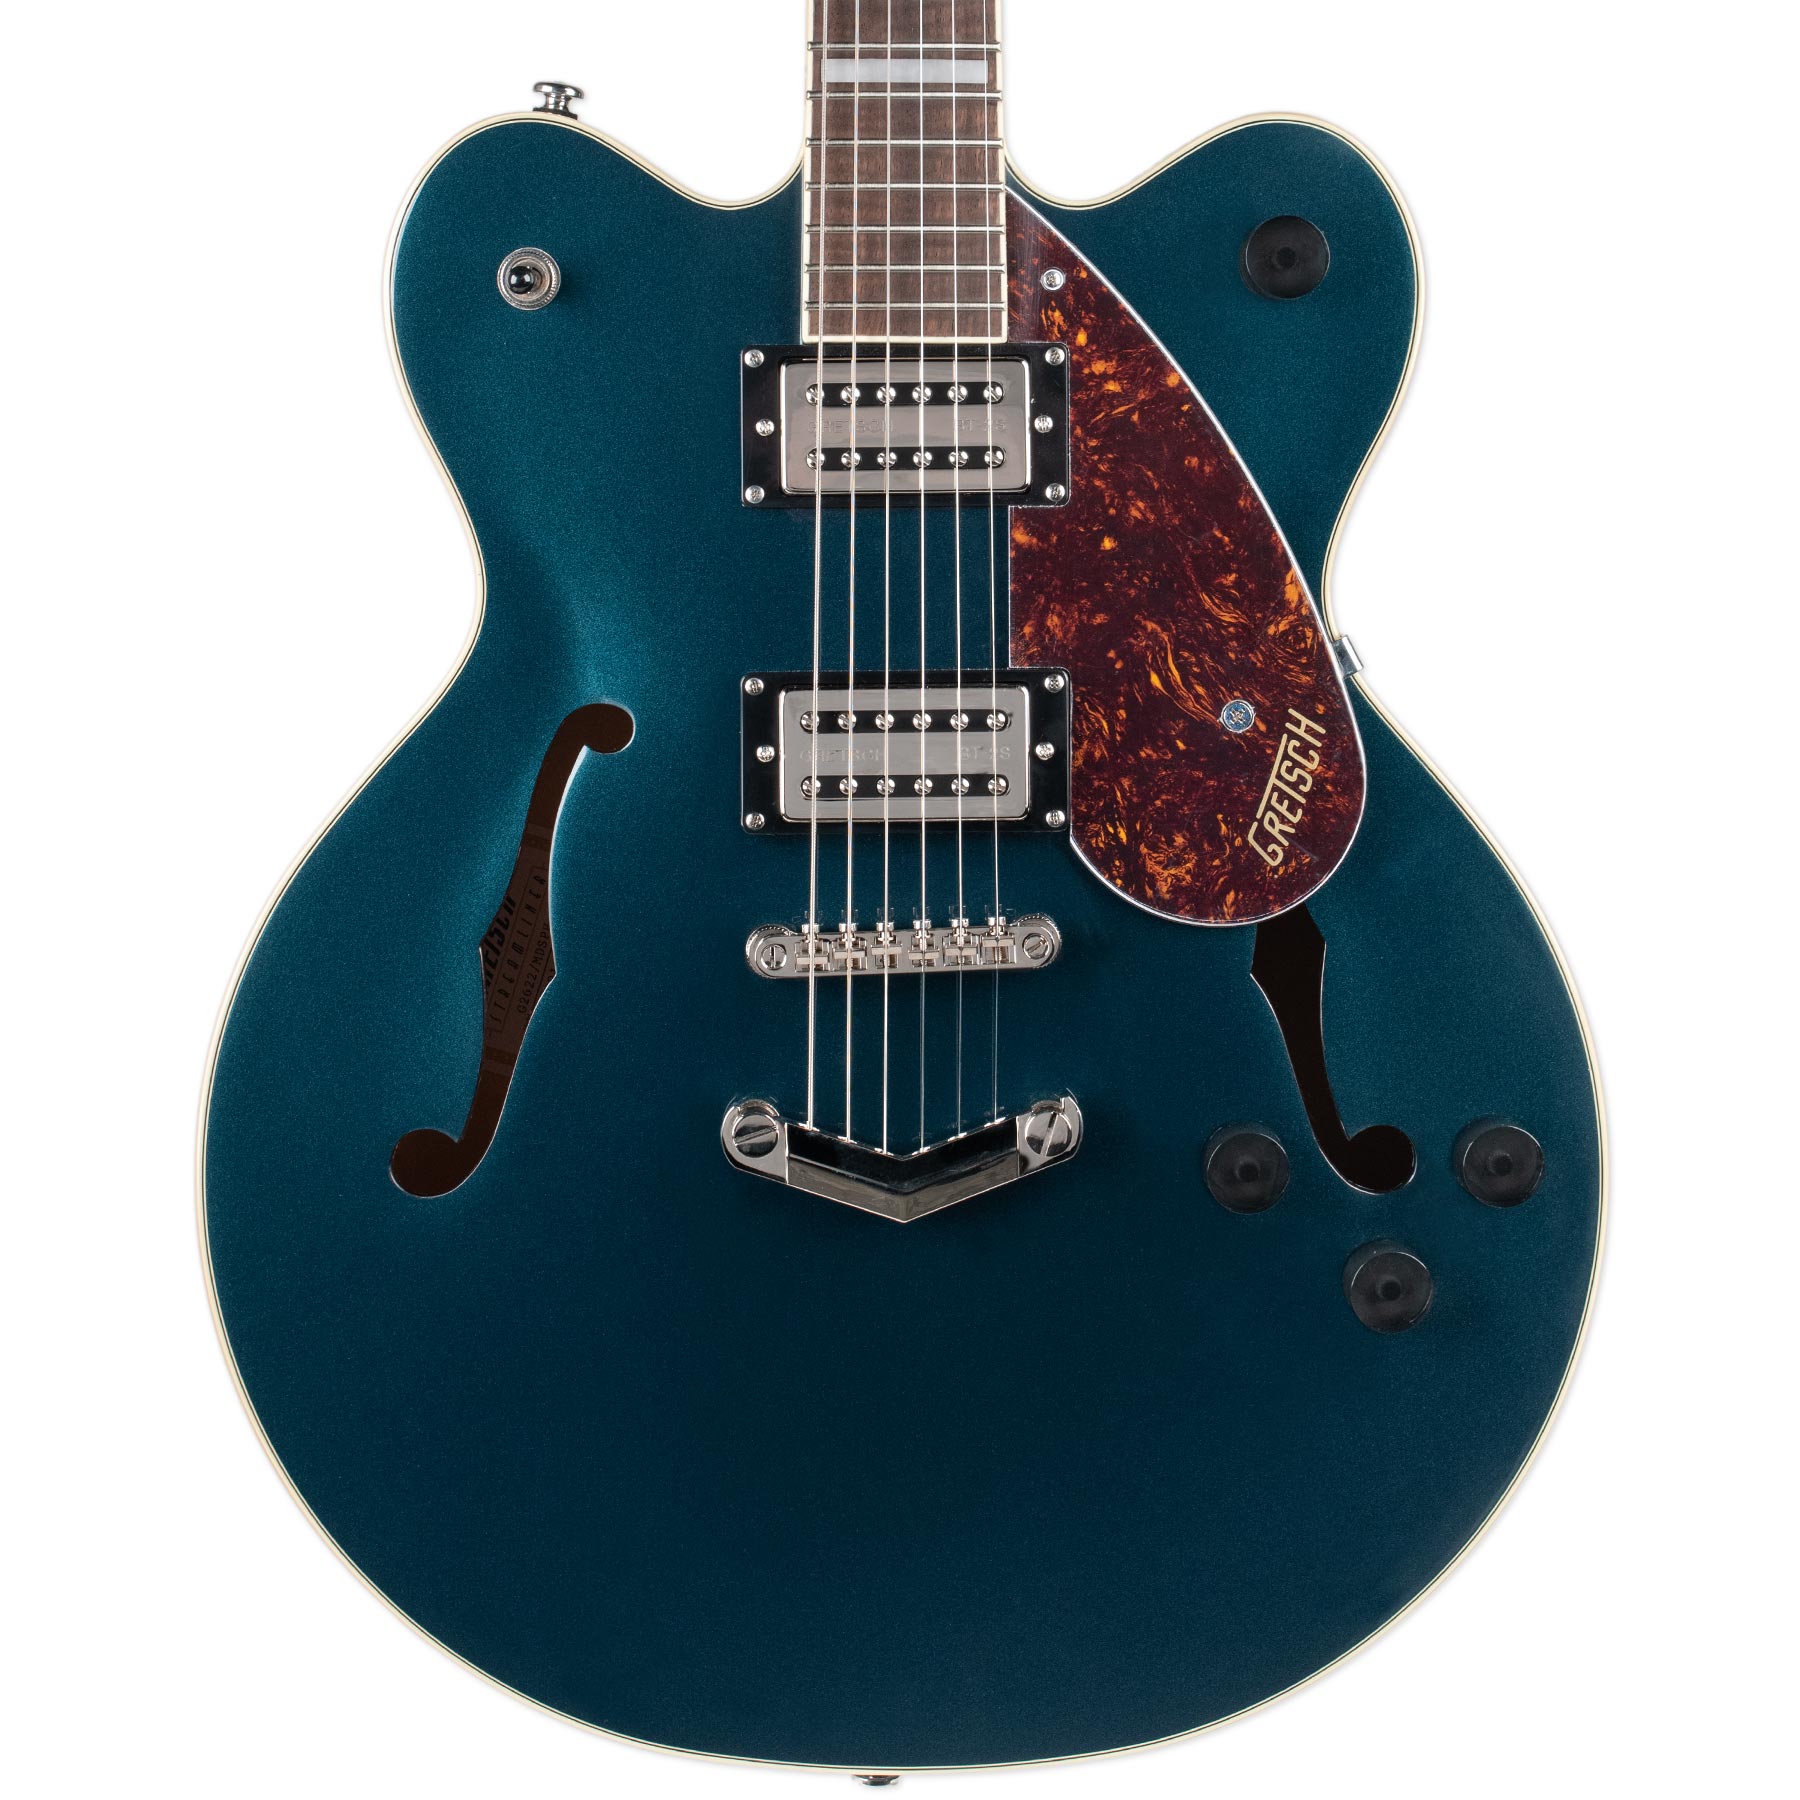 GRETSCH G2622 STREAMLINER CENTER BLOCK DOUBLE-CUT WITH V-STOPTAIL - MIDNIGHT SAPPHIRE